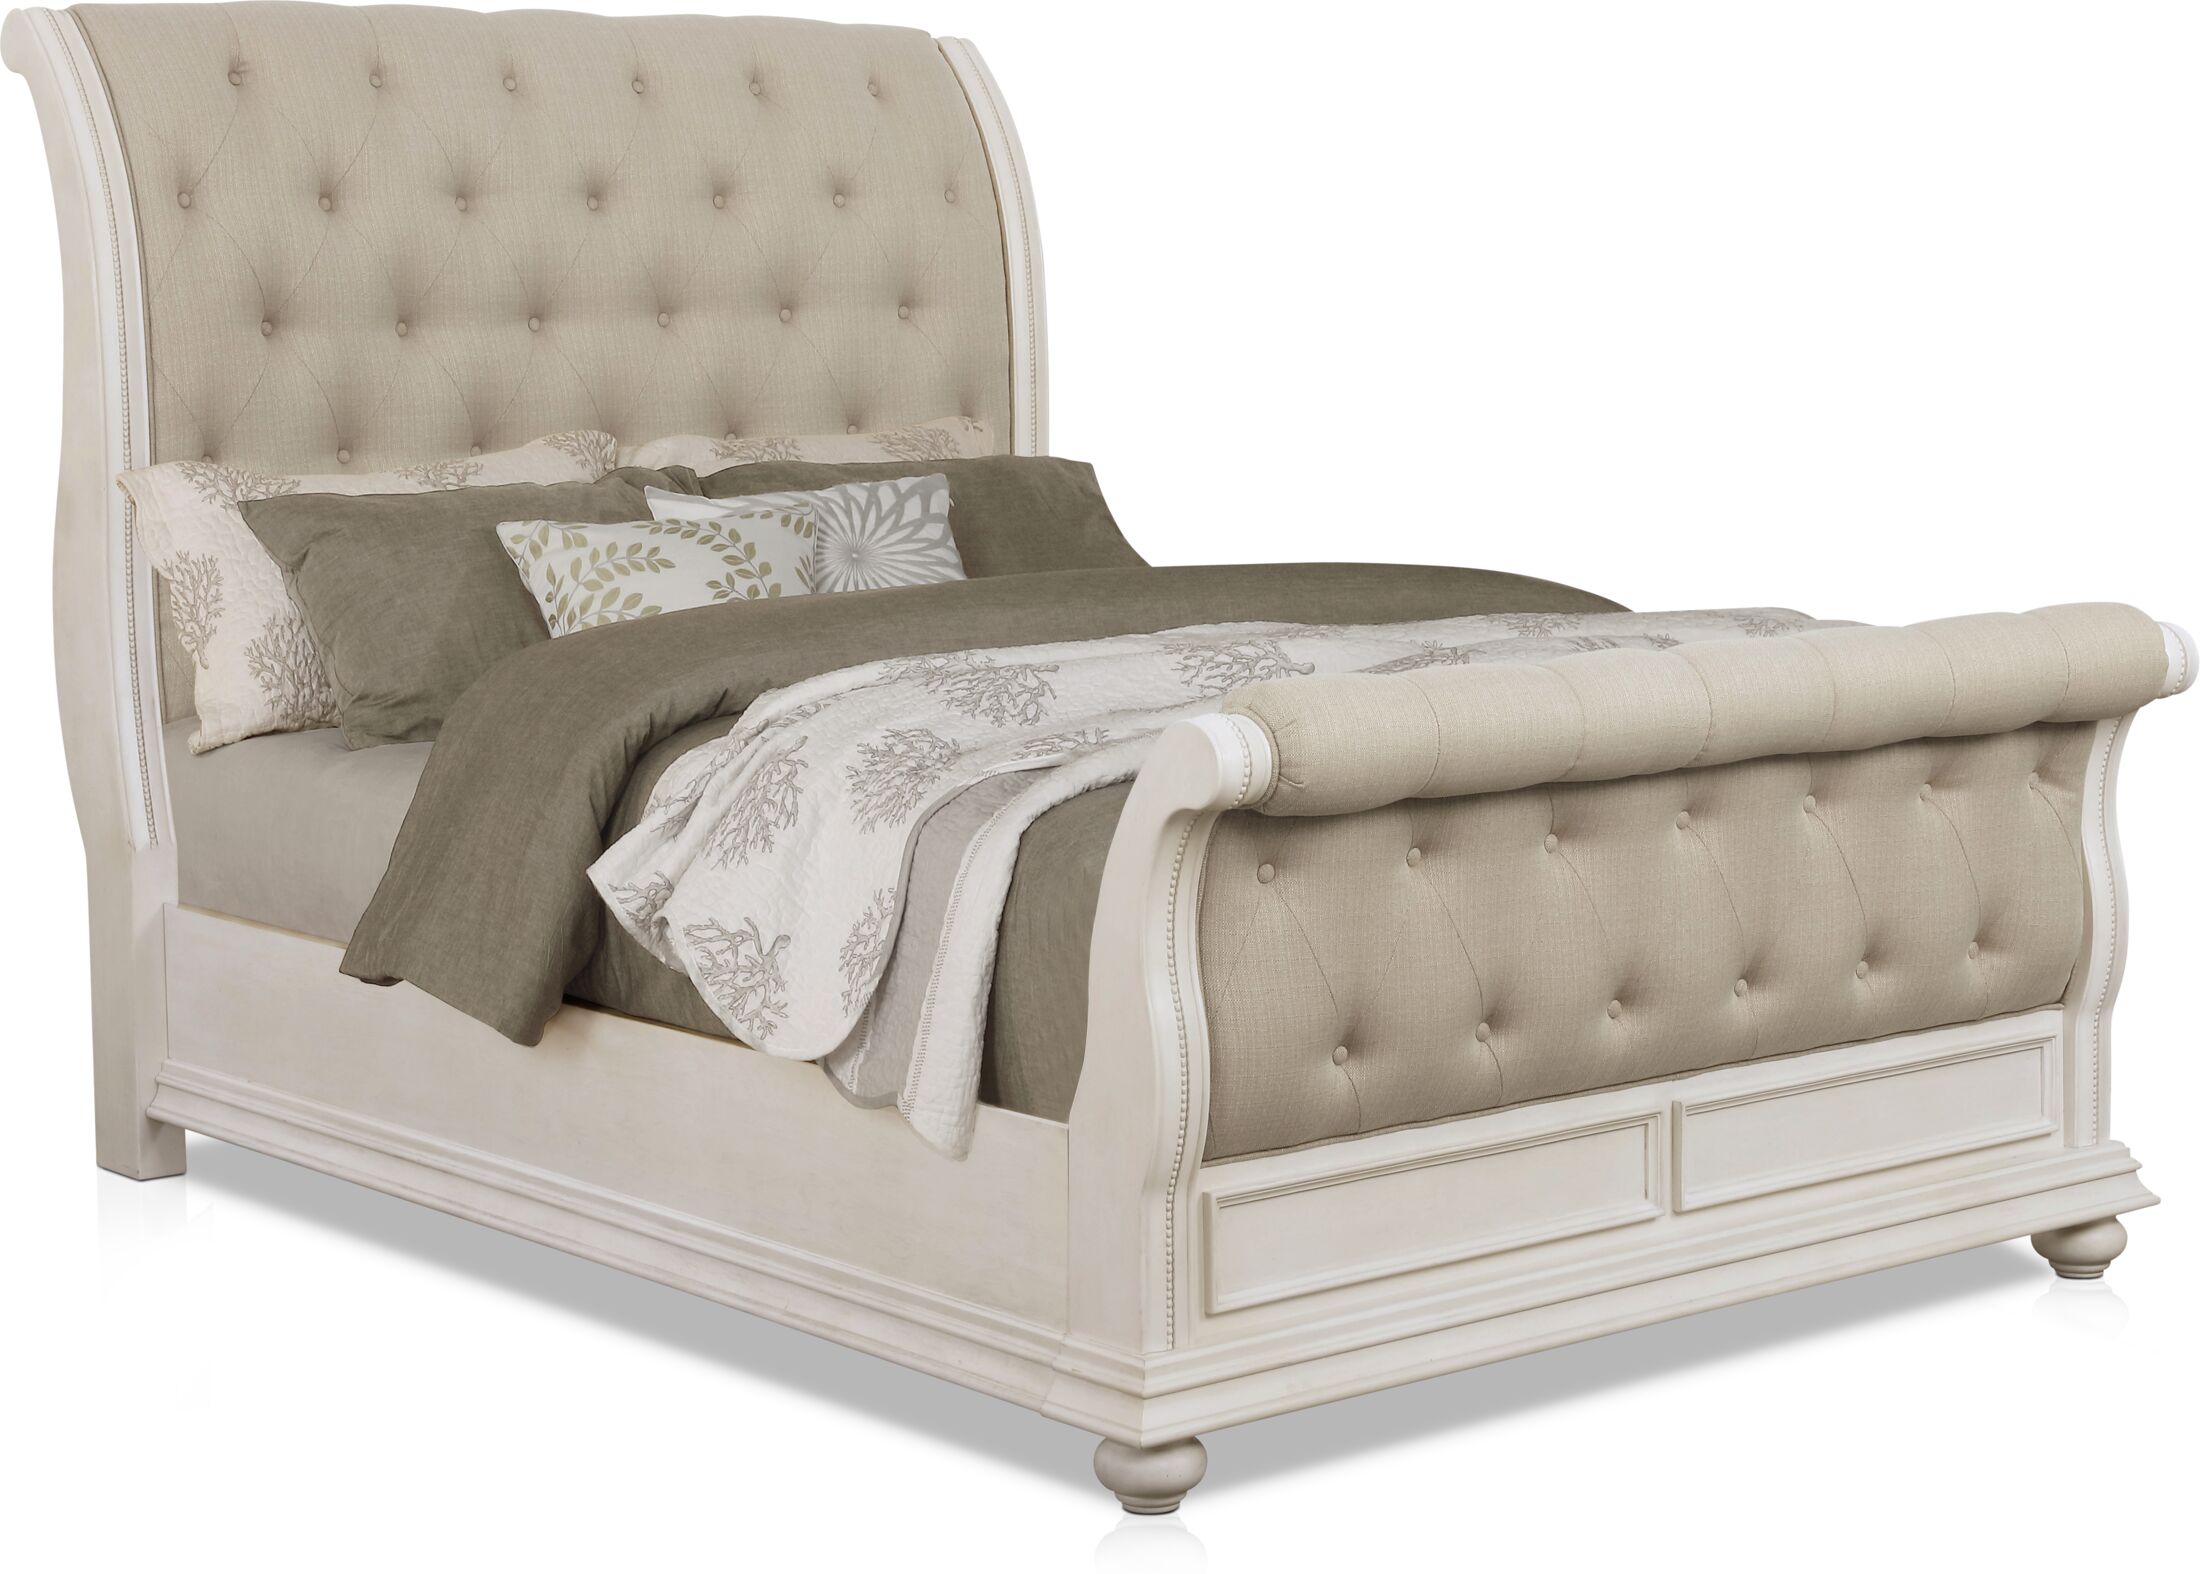 Undefined Value City Furniture, Althea Upholstered Sleigh Bed King